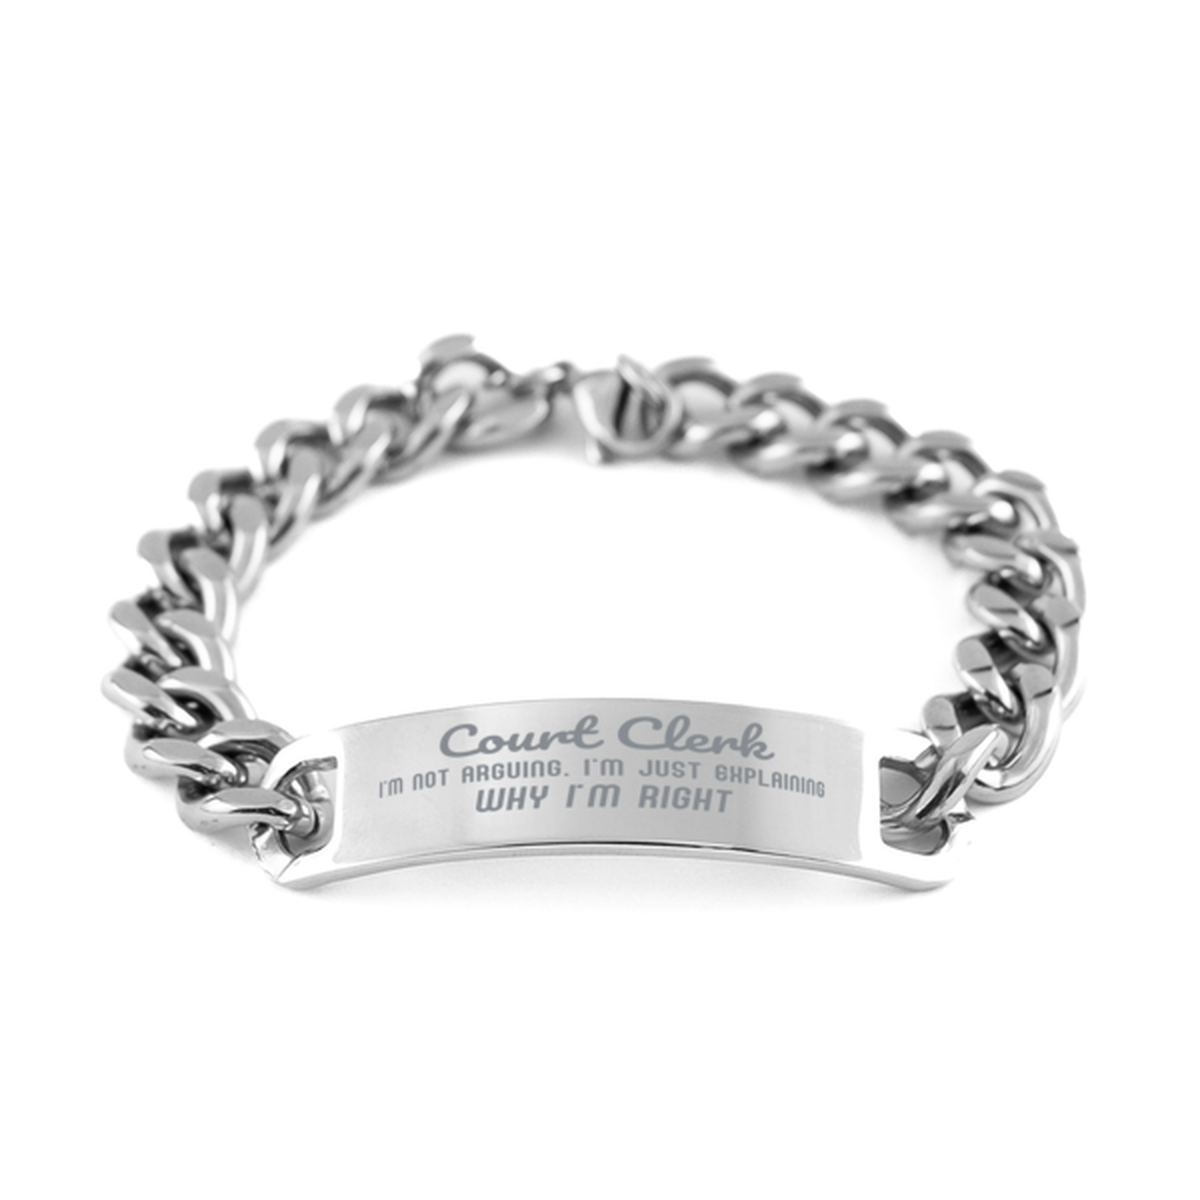 Court Clerk I'm not Arguing. I'm Just Explaining Why I'm RIGHT Cuban Chain Stainless Steel Bracelet, Graduation Birthday Christmas Court Clerk Gifts For Court Clerk Funny Saying Quote Present for Men Women Coworker